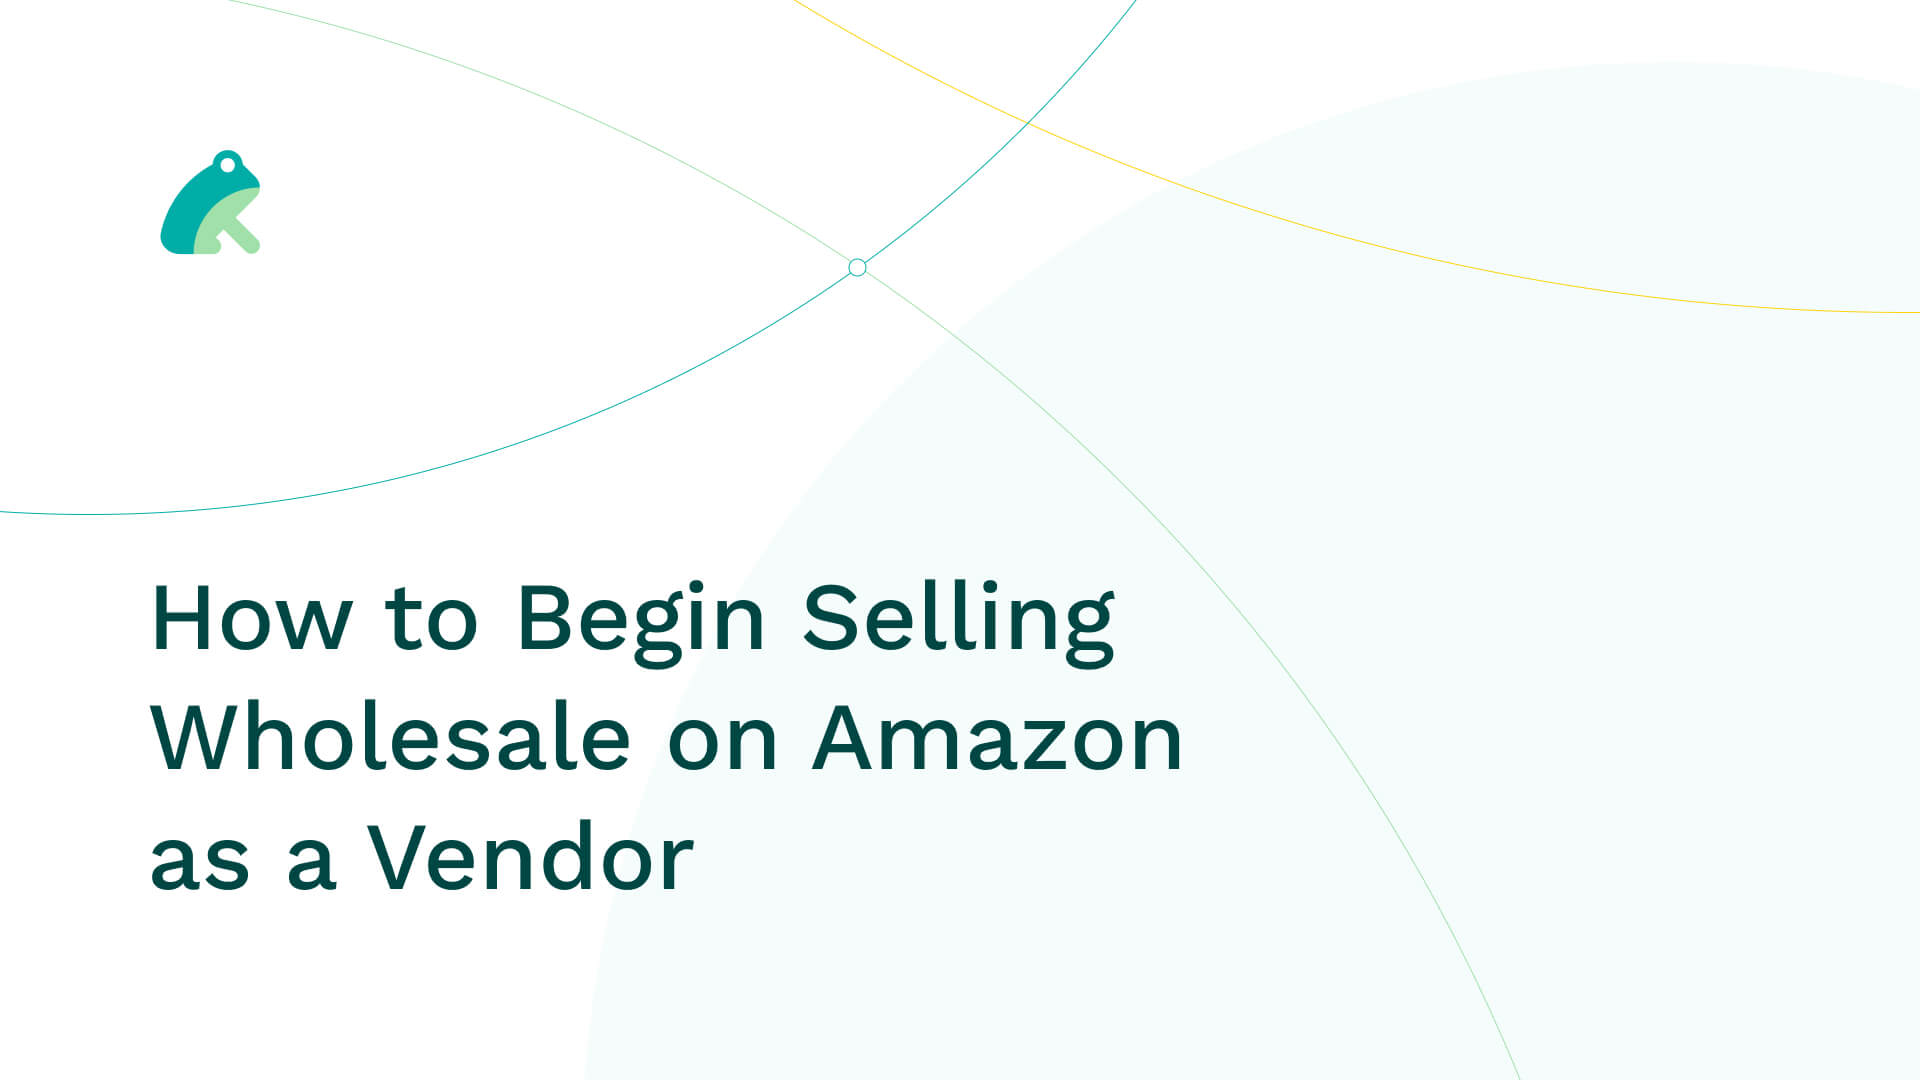 How to Begin Selling Wholesale on Amazon as a Vendor